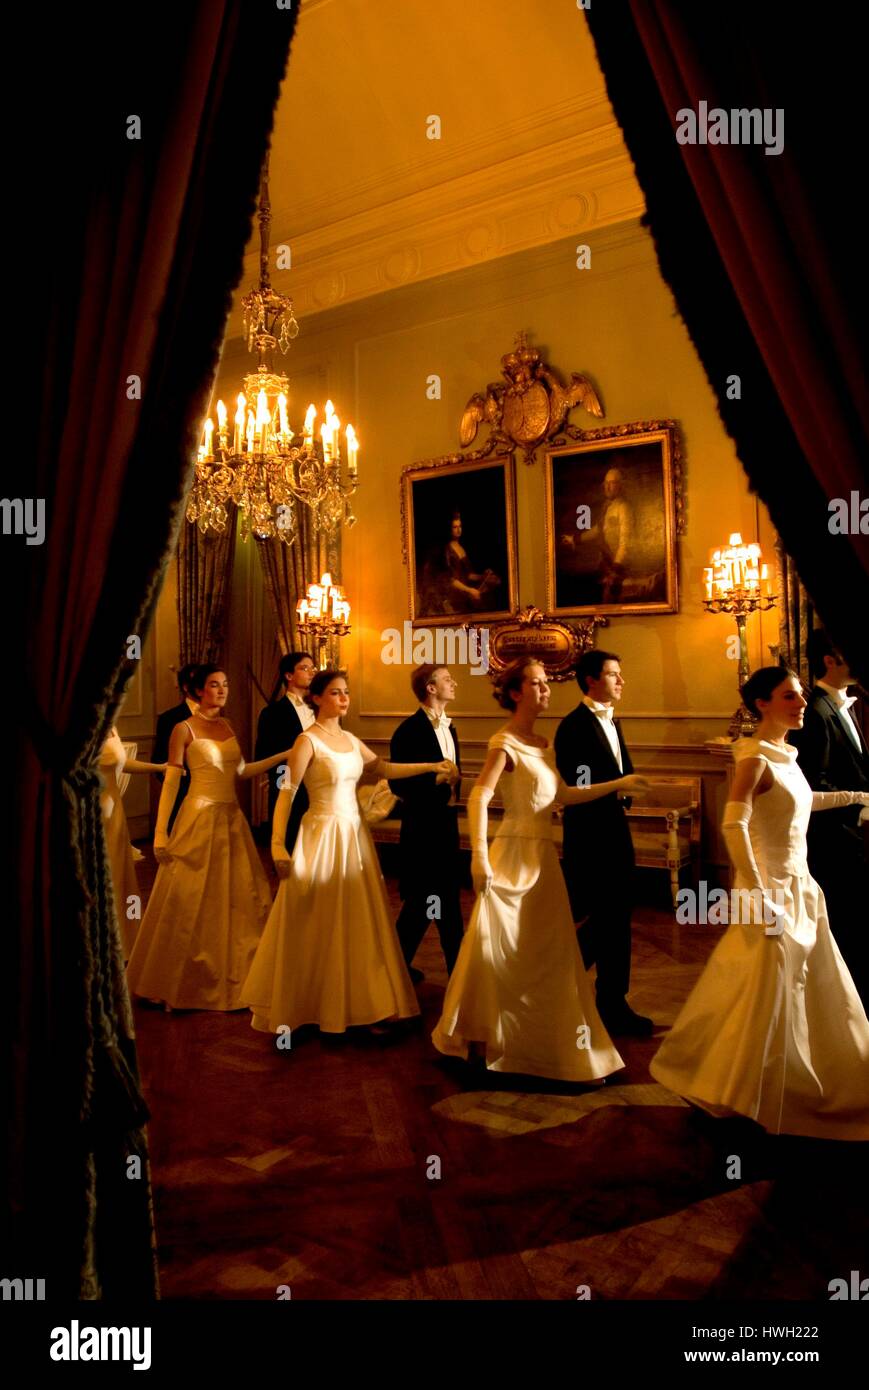 Belgium, Brussels, neighbourhood of the European Union institutions, the  Concert Noble, the Russian debutante Ball at the Concert Noble in Brussels,  Brussels cosmopolitan and multicultural Stock Photo - Alamy